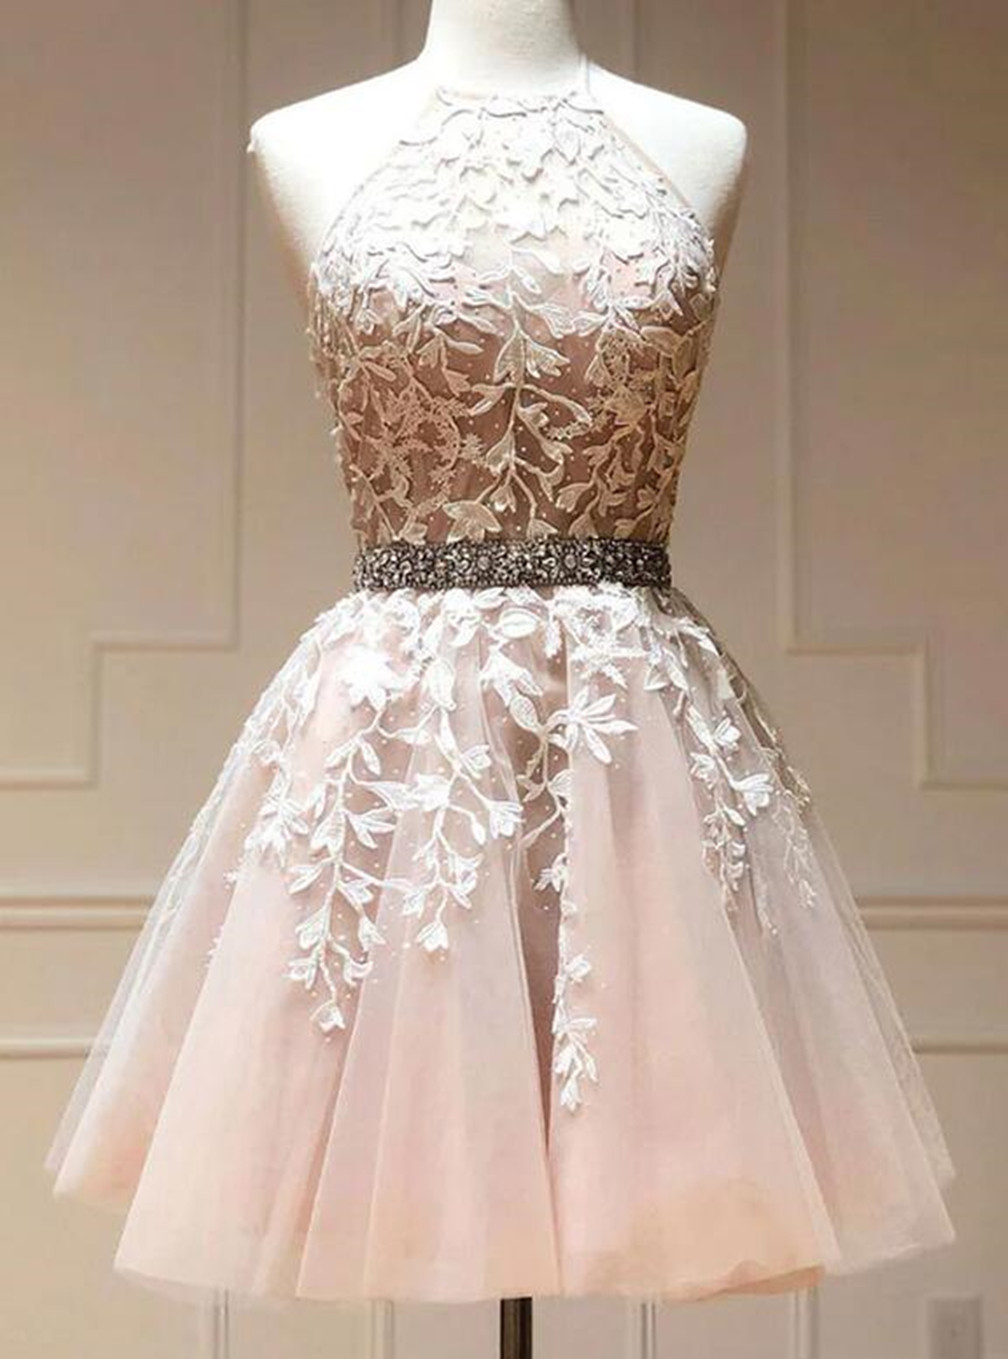 Women Cute Tulle Lace Prom Dress Short A-line Appliques Homecoming Dress Sleeveless Cocktail Party Gowns Yp042